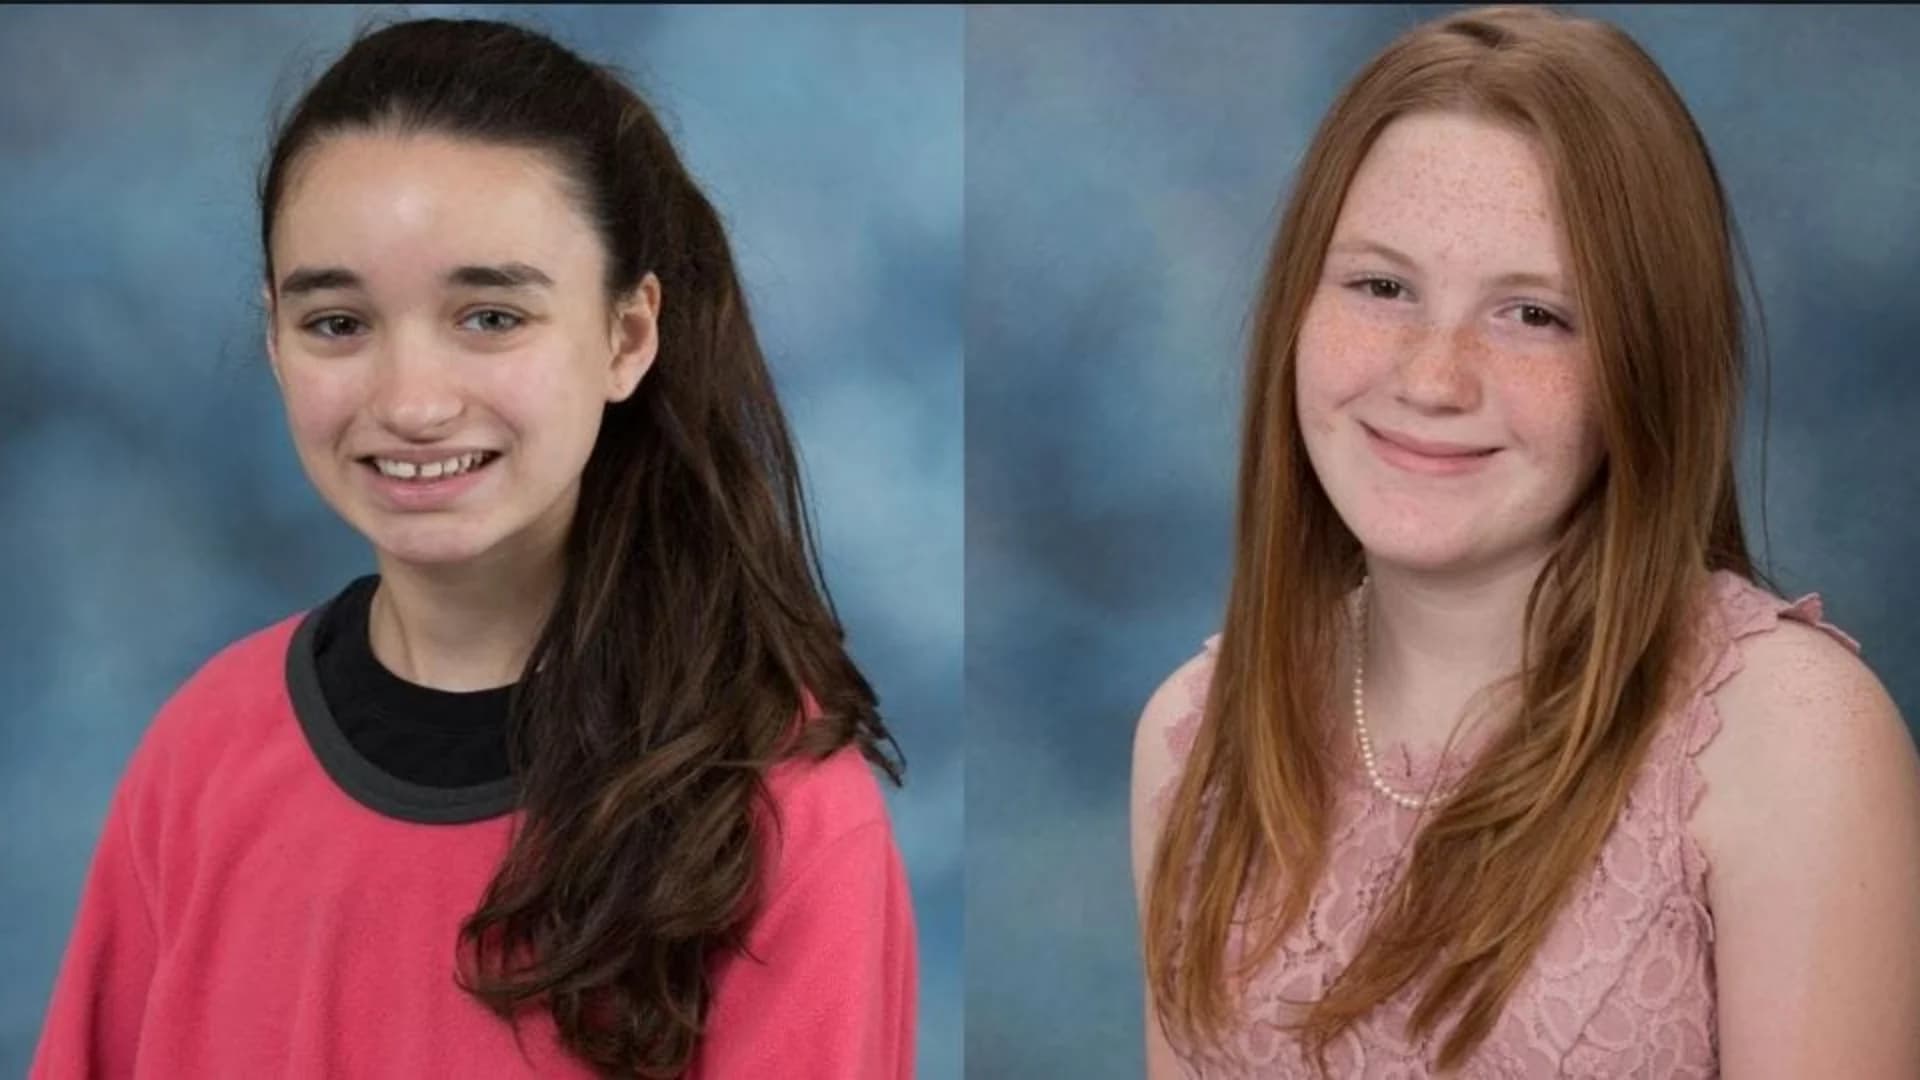 Authorities search for 2 missing Eastern Christian students